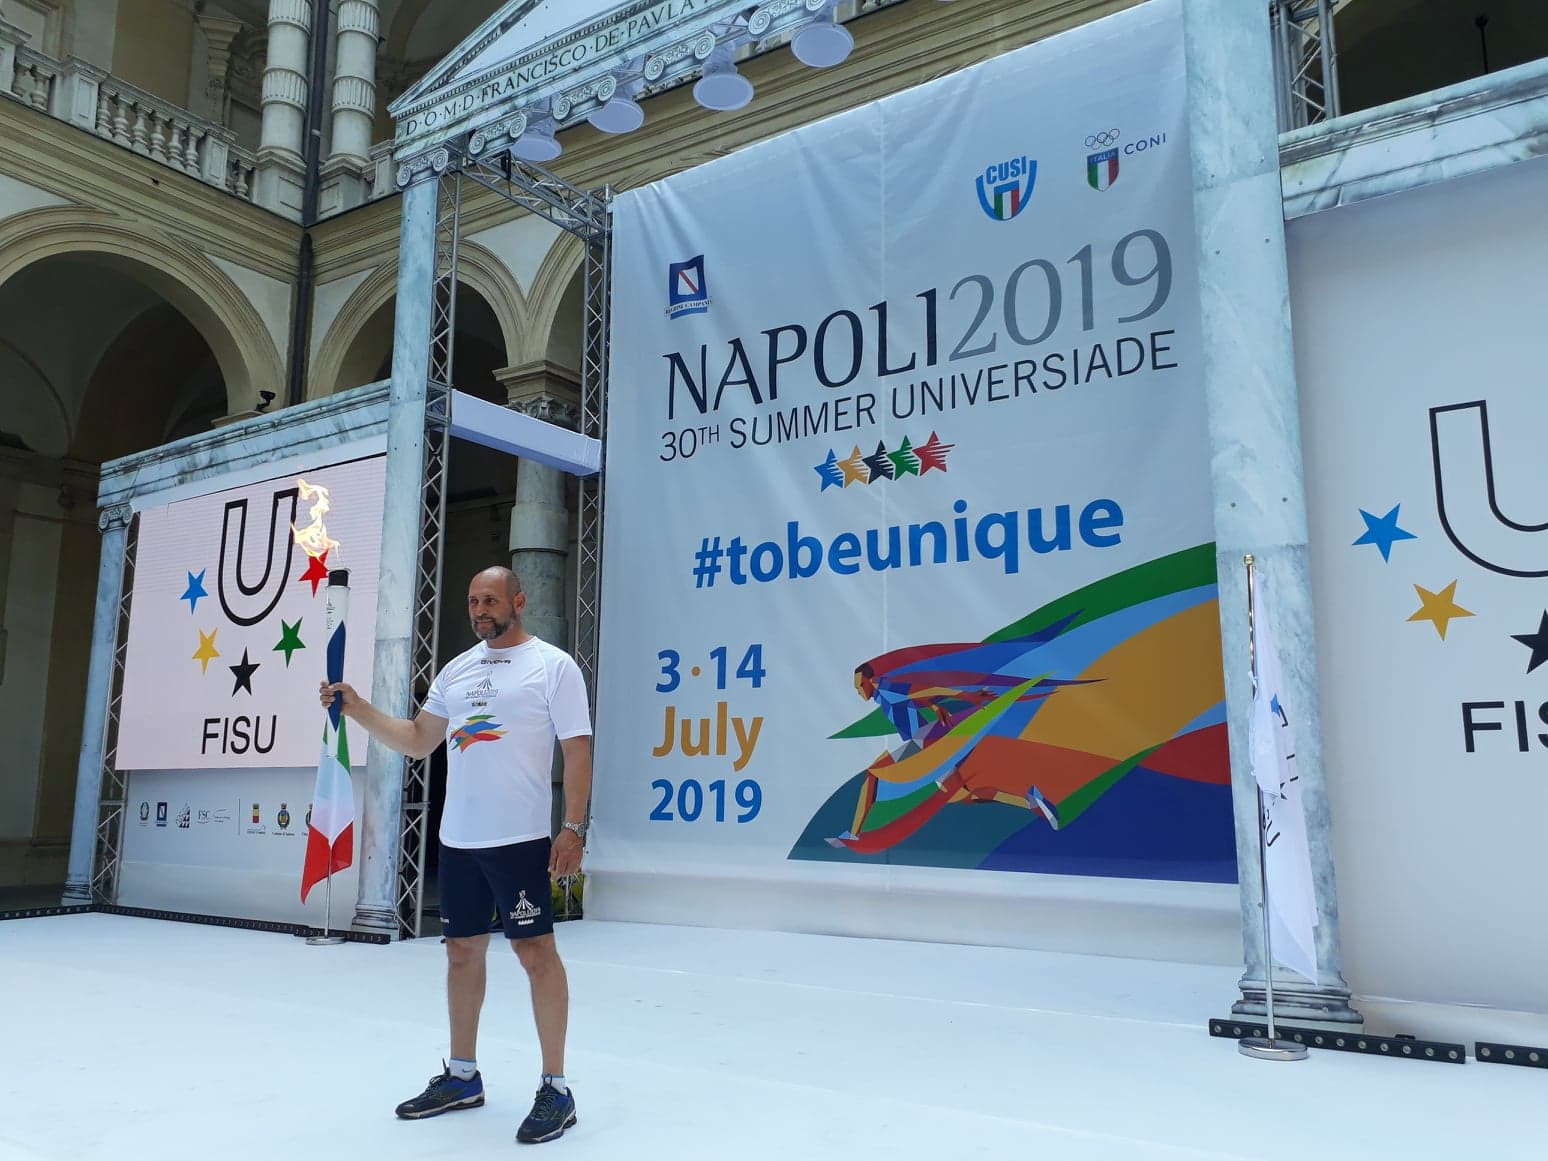 Double Olympic champion Tizzano starts off Naples 2019 Torch Relay